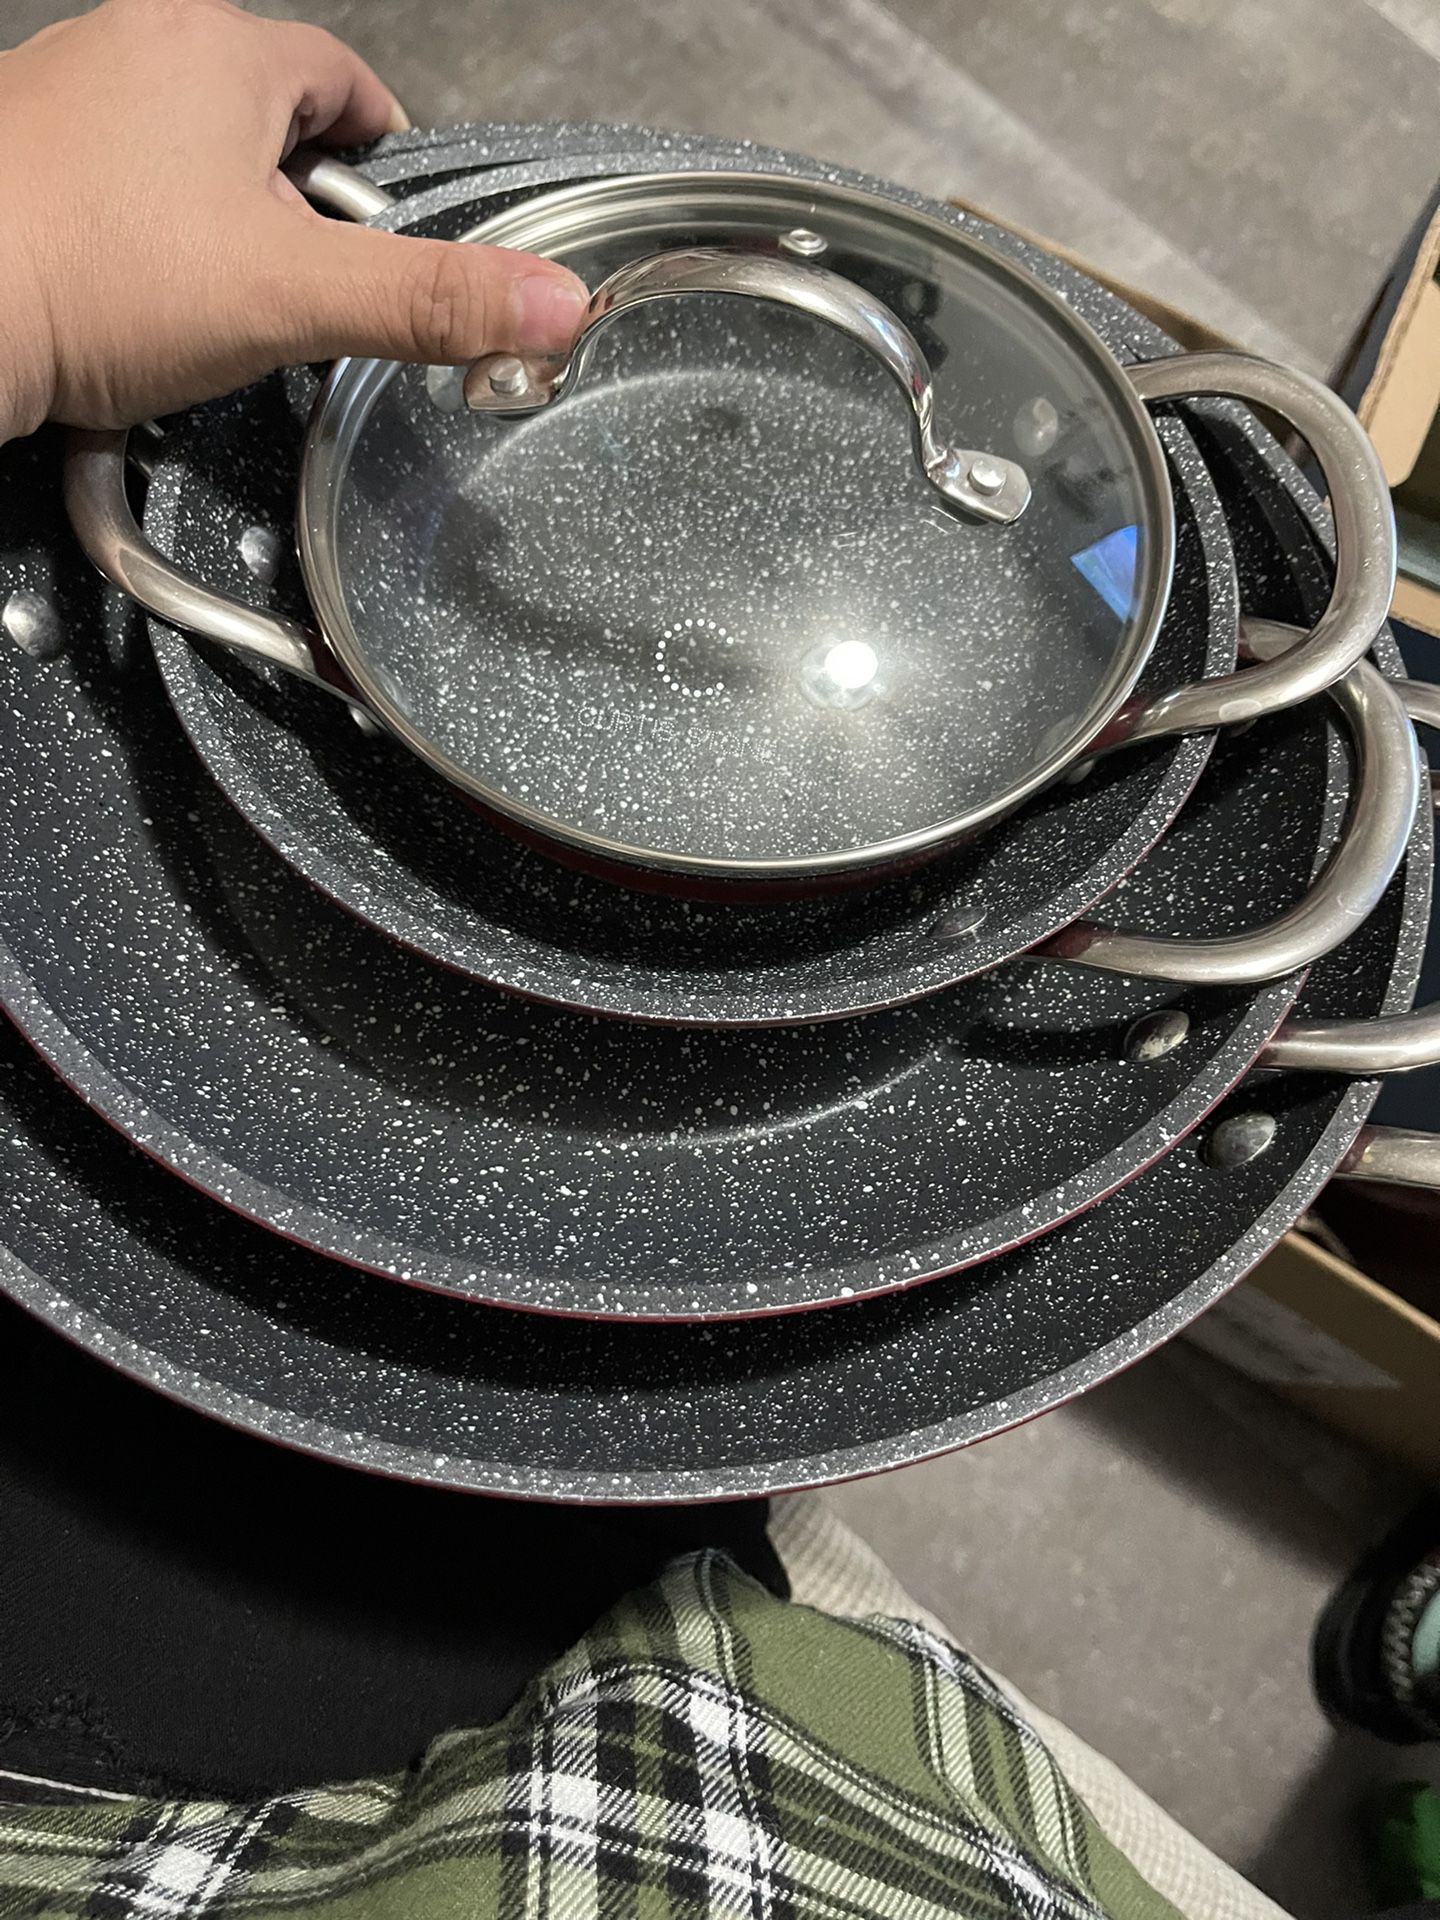 Curtis stone pots and pans 7 with lids